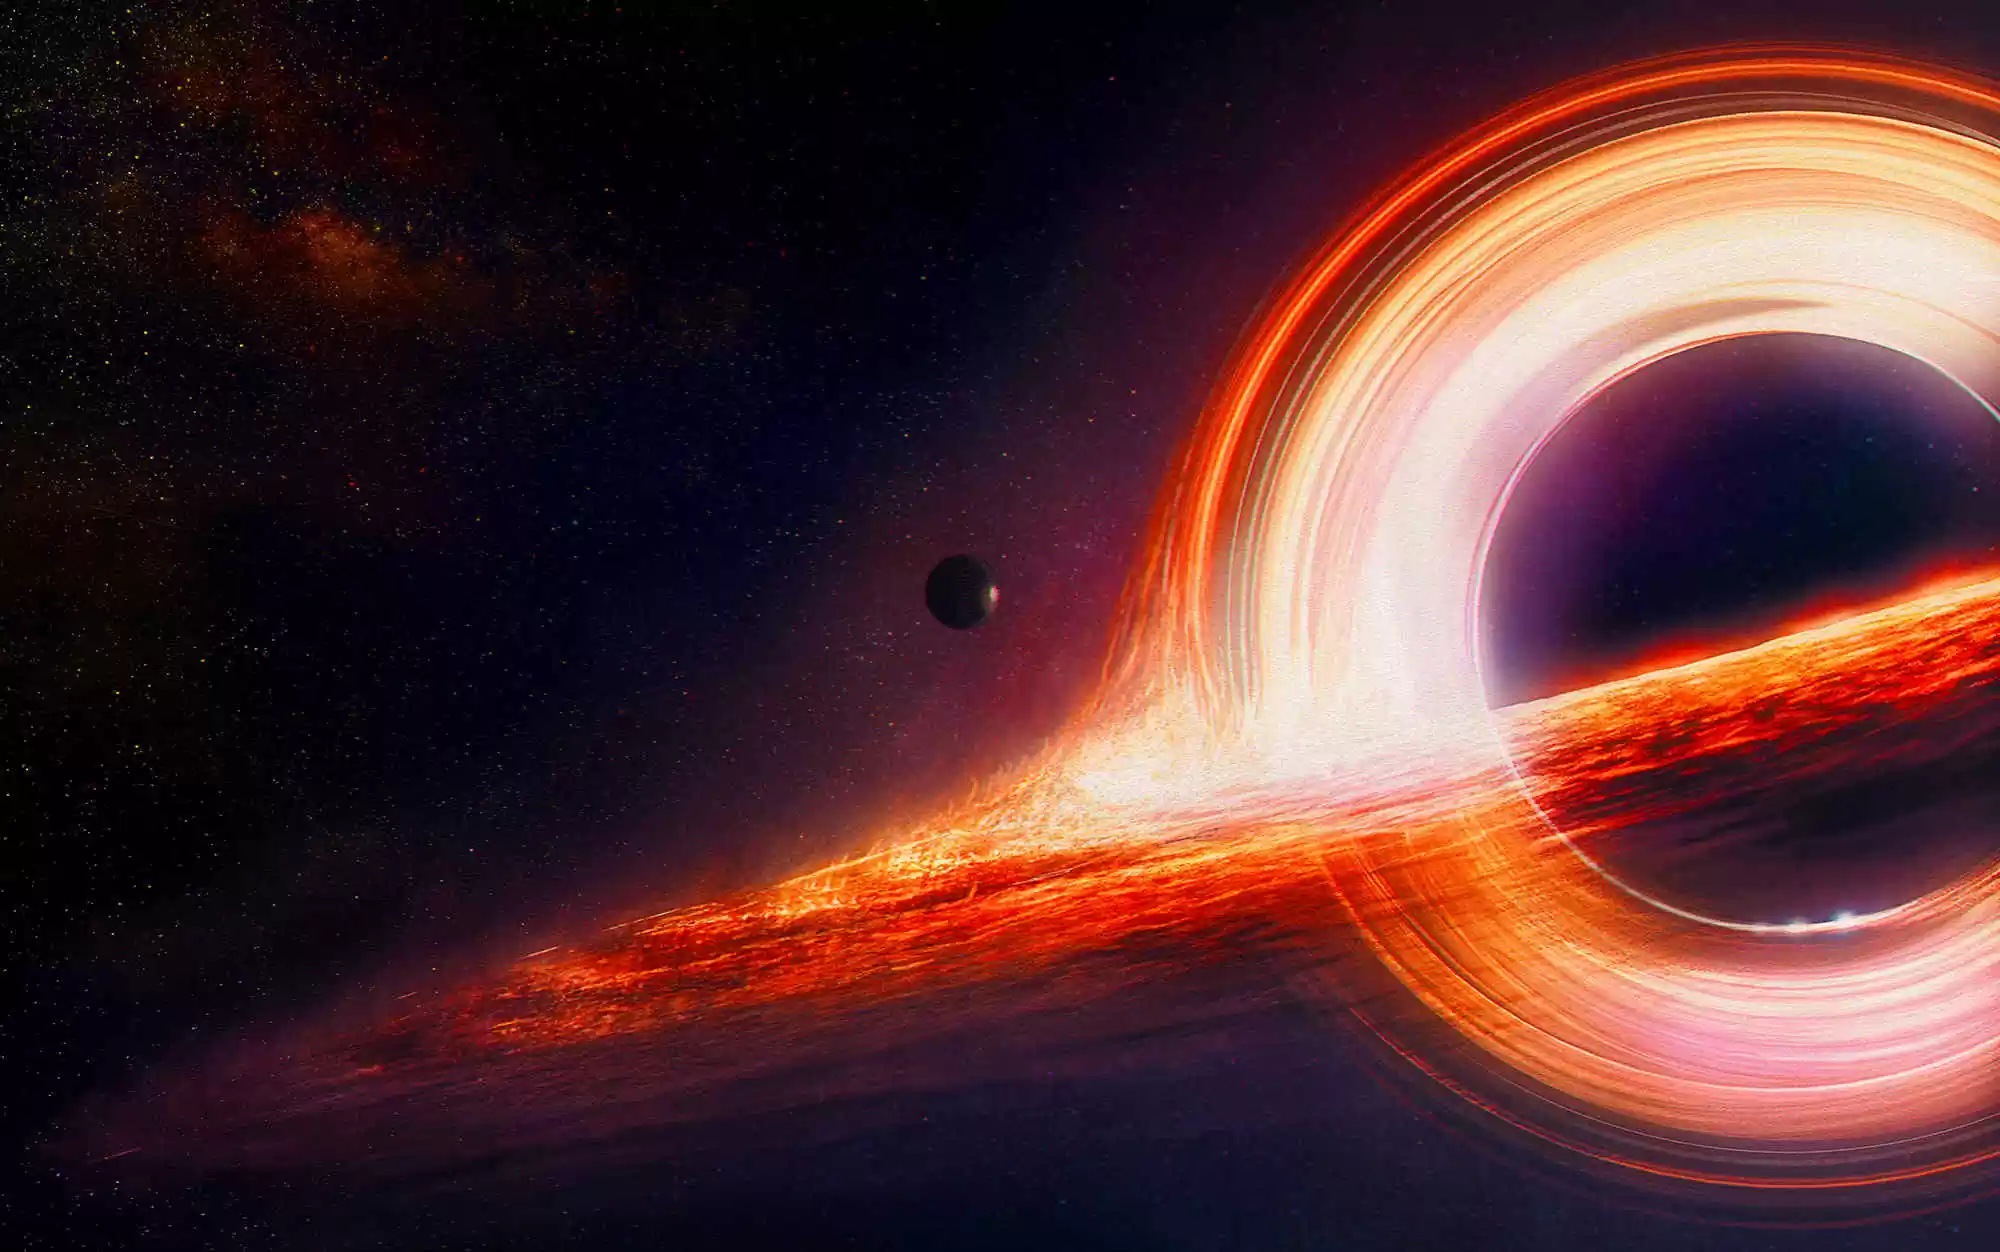 Scientists have found a black hole escaping from the galaxy